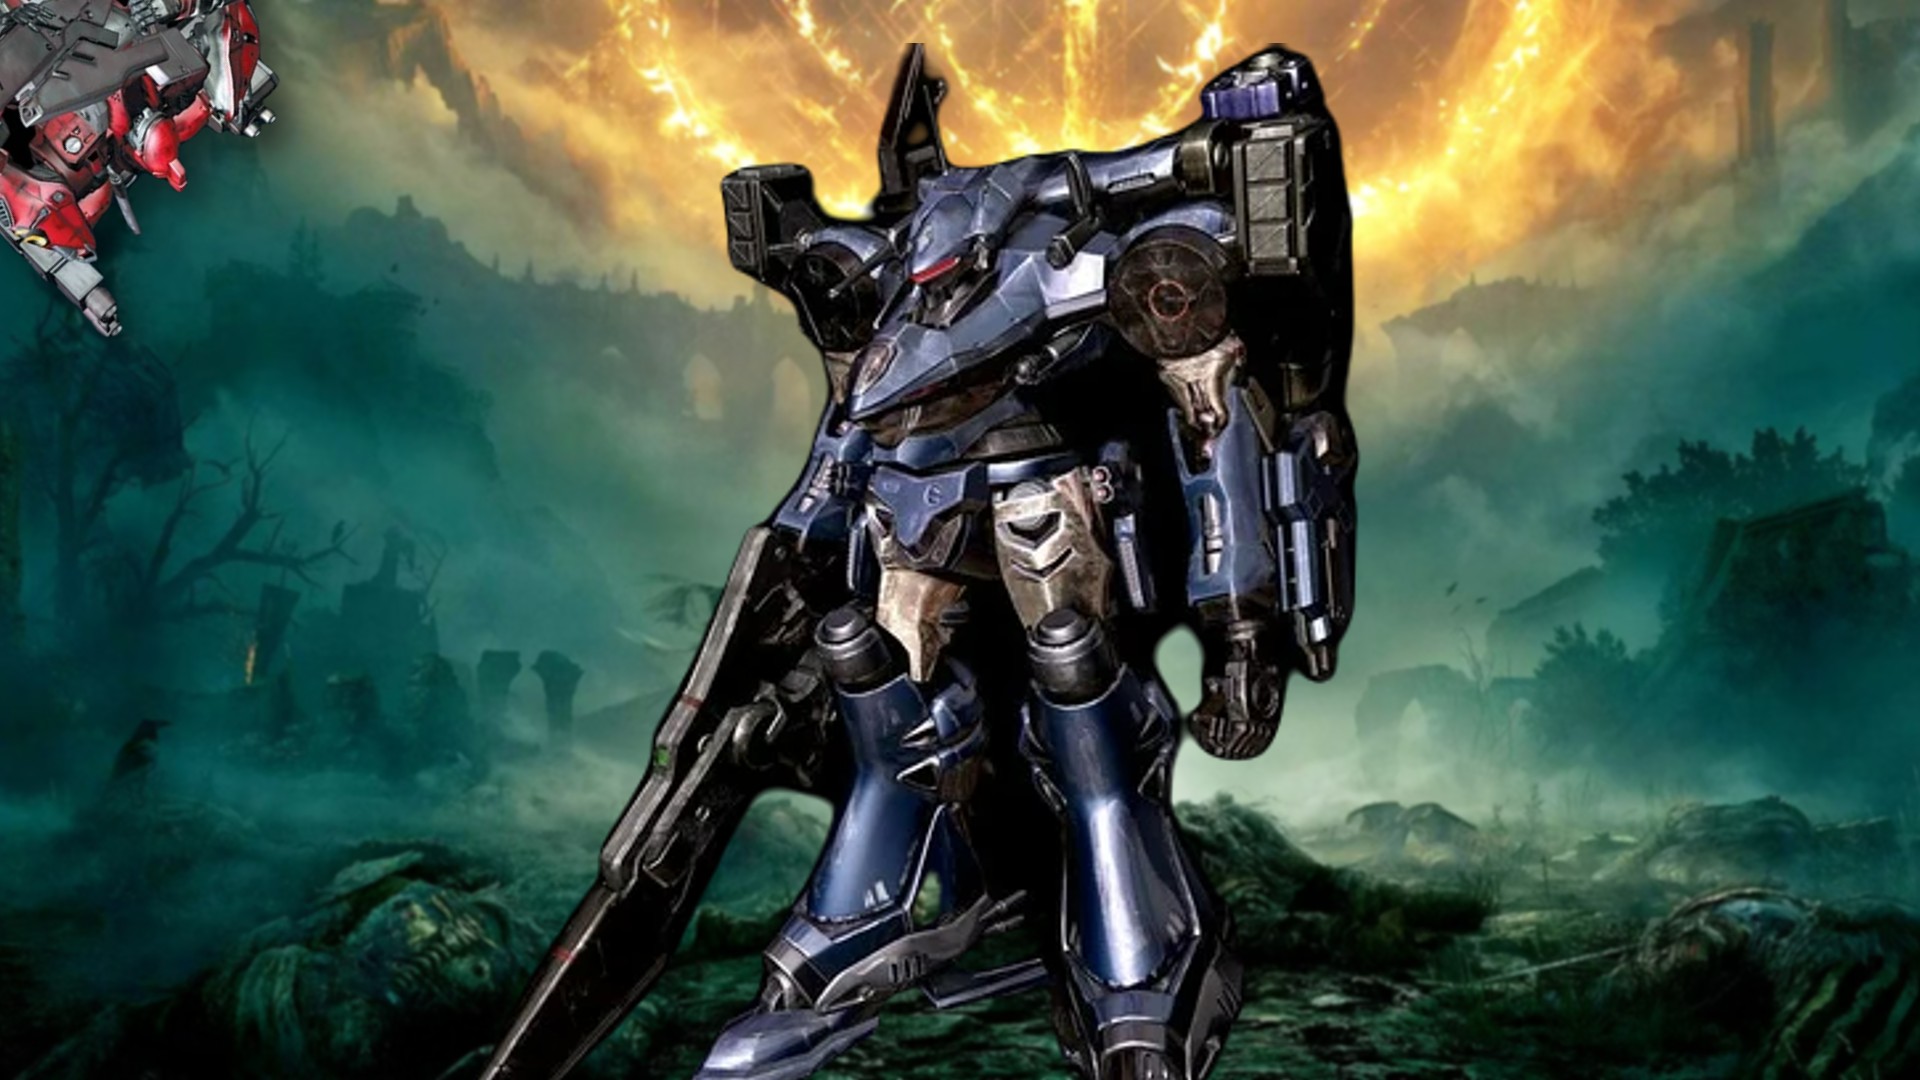 Elden Ring doesn't even come close: Armored Core 6 has the best